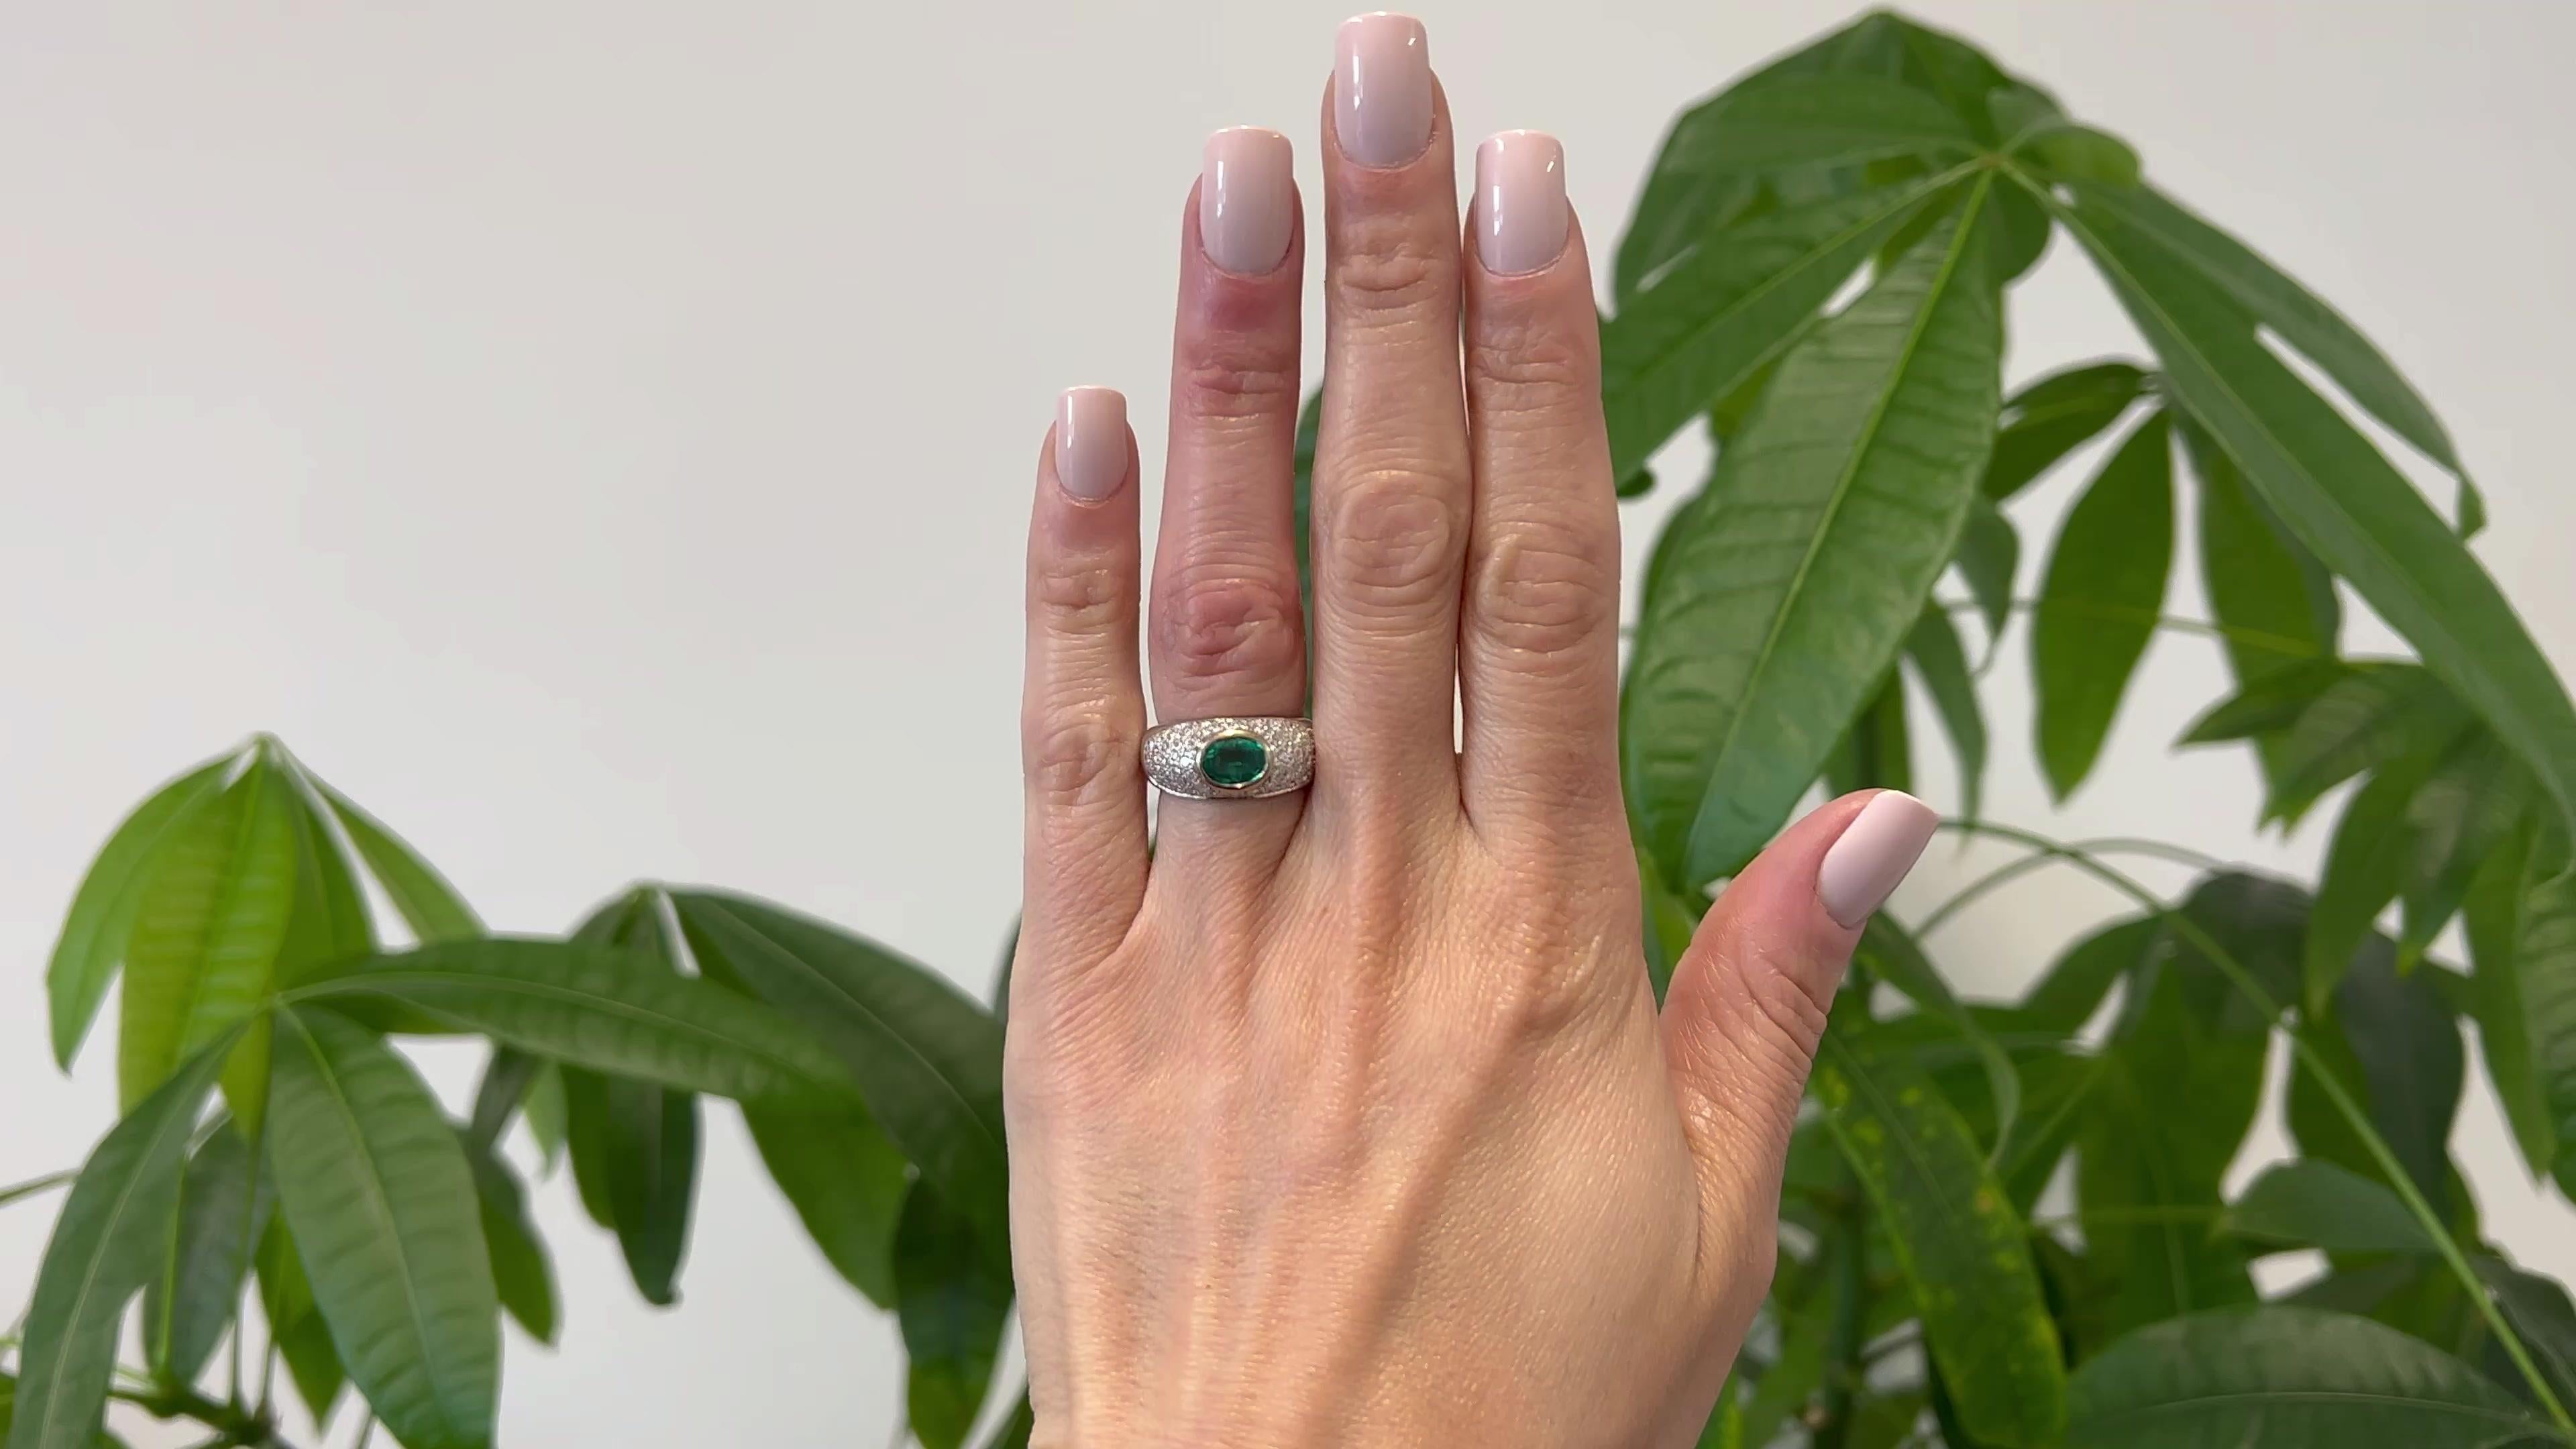 One Vintage Emerald Diamond 18k White Gold Ring. Featuring one oval mixed cut emerald weighing approximately 0.75 carat. Accented by 54 round brilliant cut diamonds with a total weight of approximately 1.50 carats, graded F color, VS clarity.